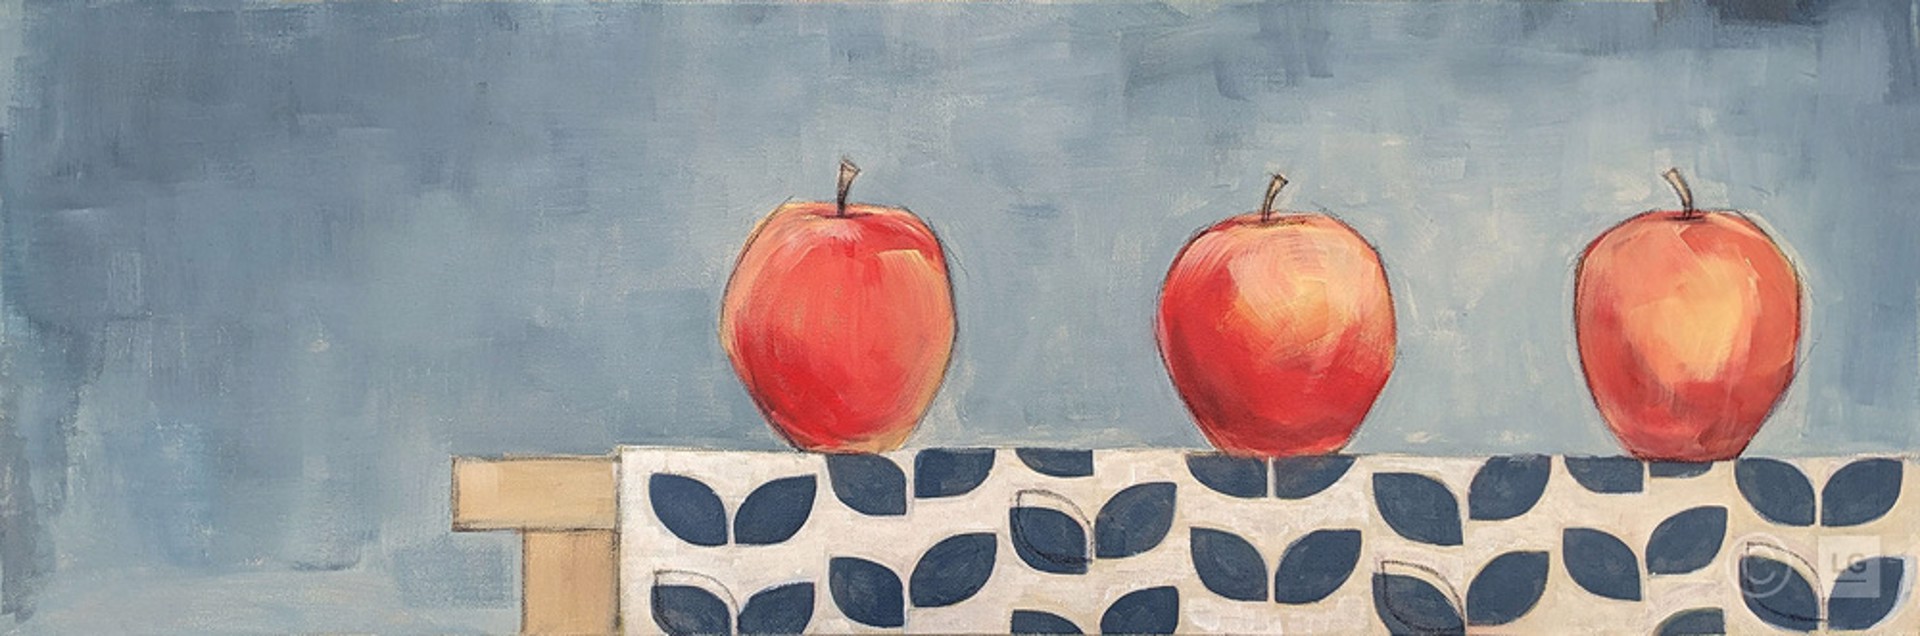 3 Stationary Apples by Missy Morrow